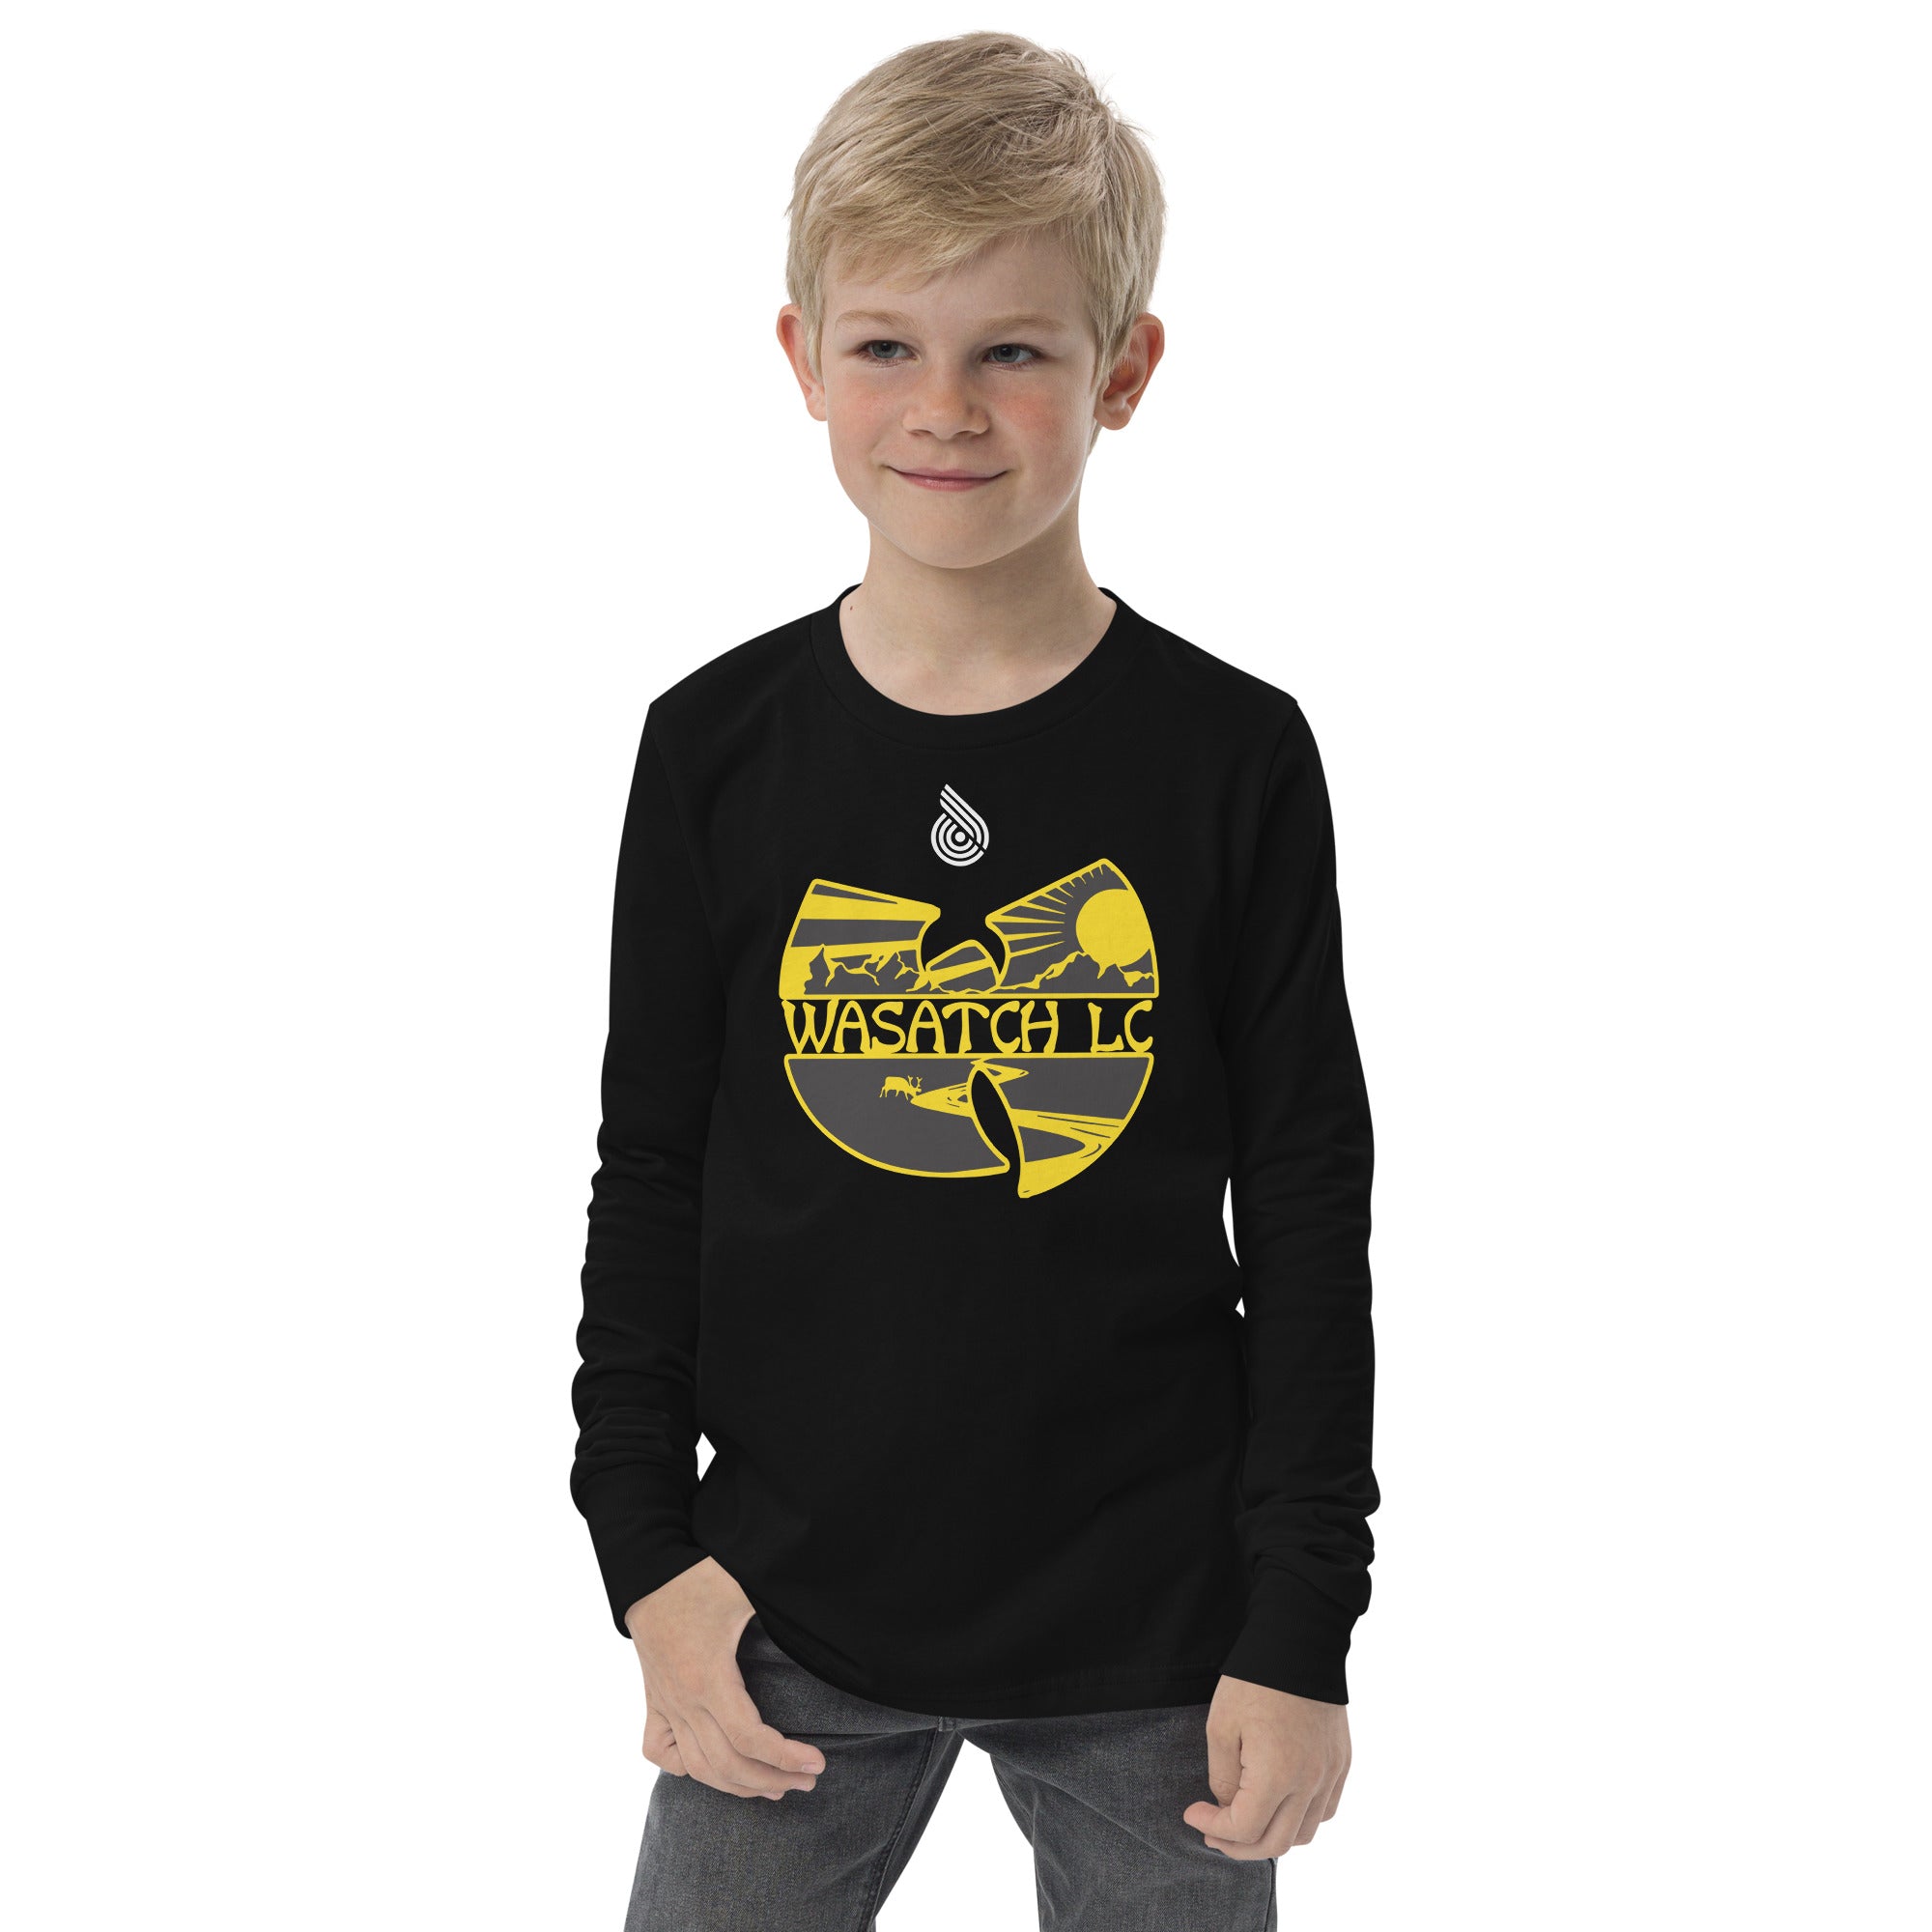 Wasatch LC Youth long sleeve tee